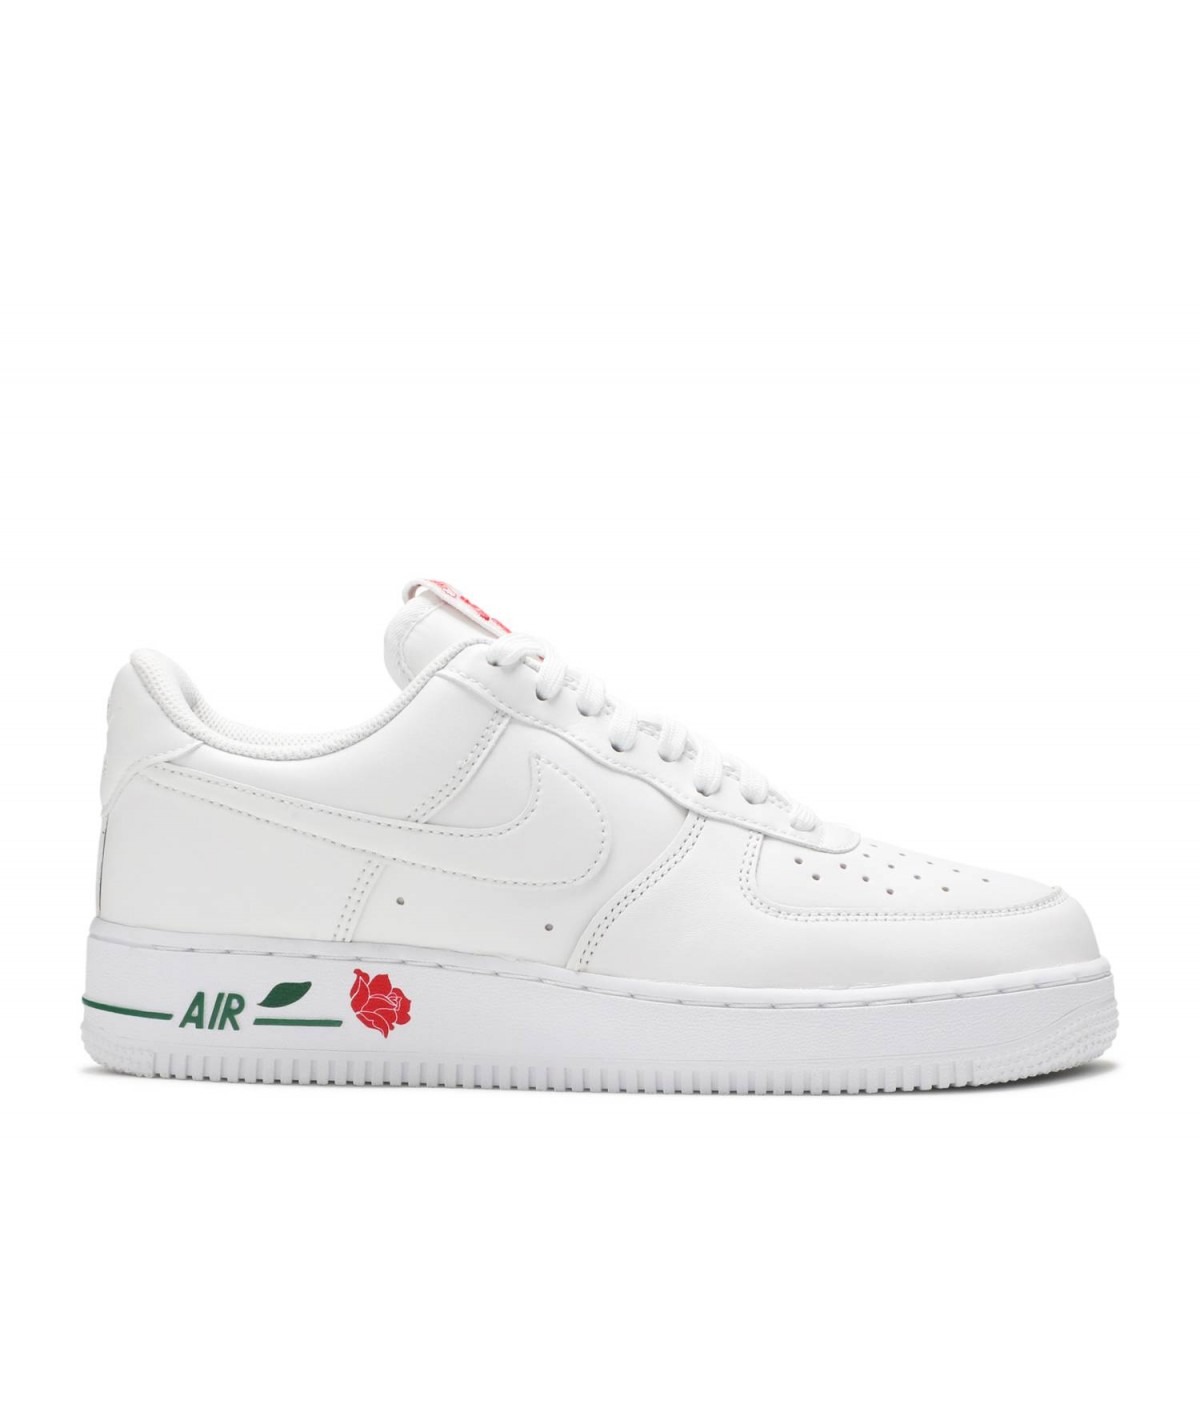 Nike Air Force 1 Low 07 LX ‘Thank You Plastic Bag